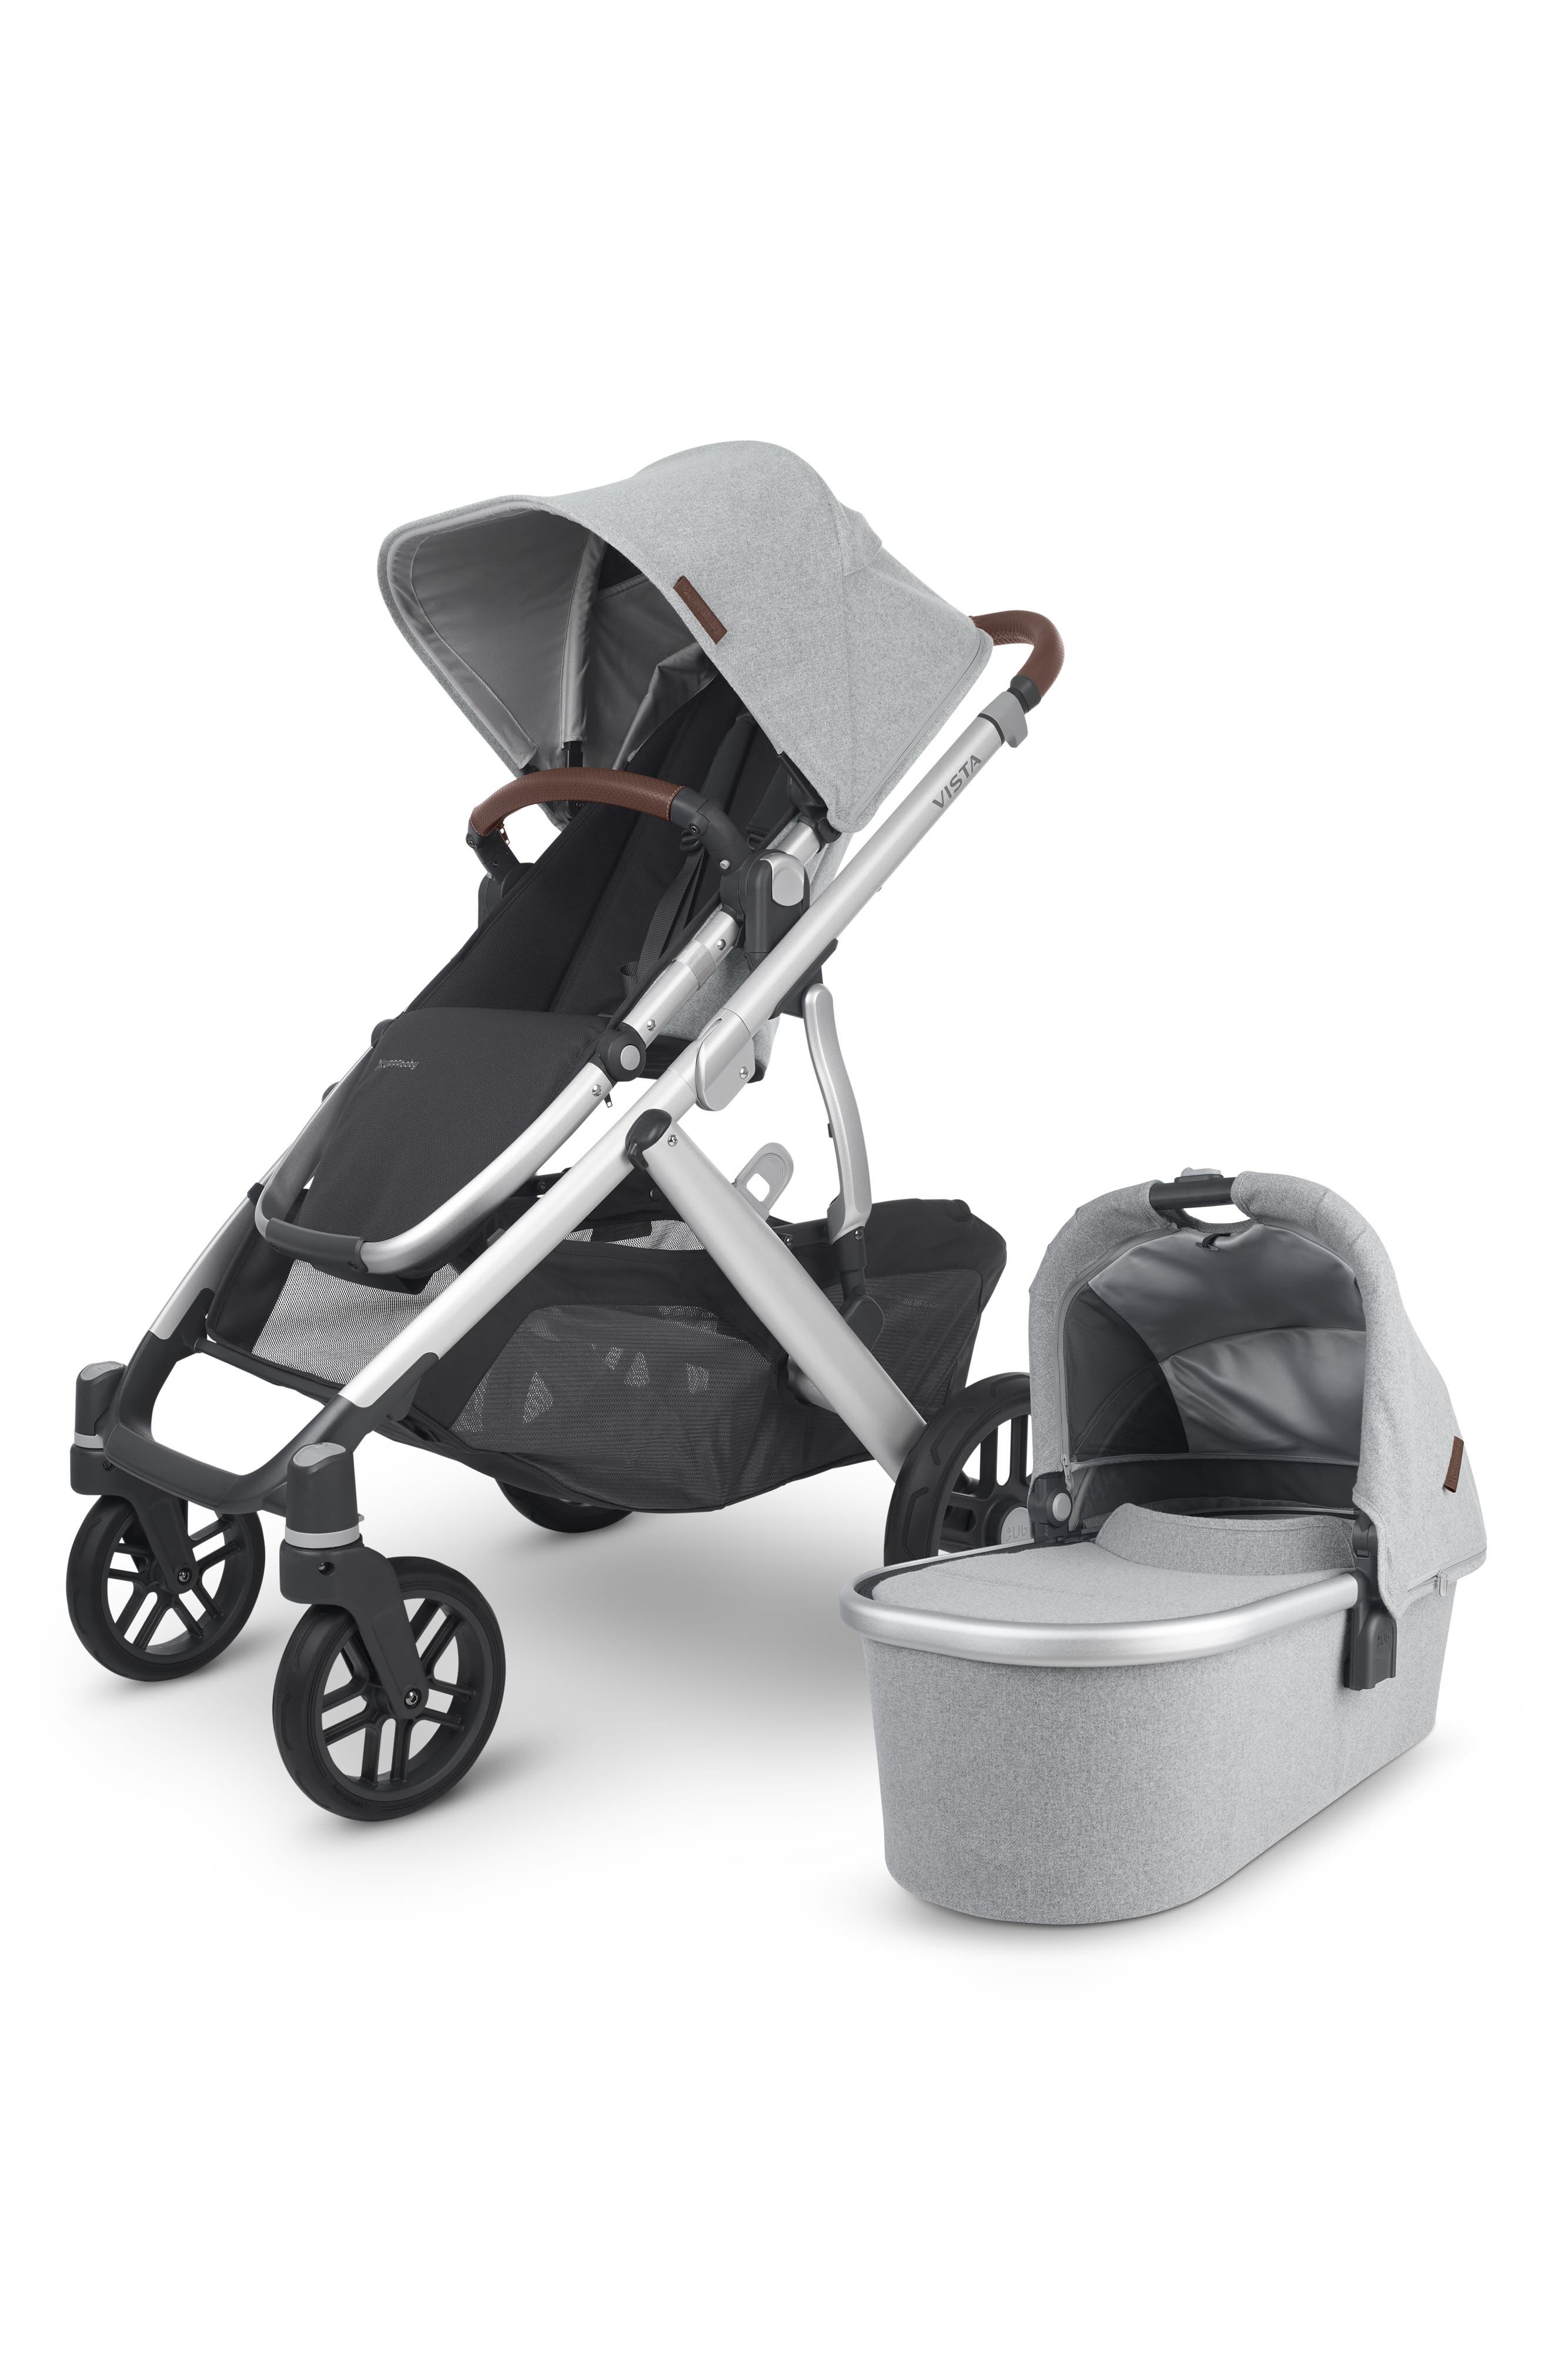 where to buy uppababy stroller